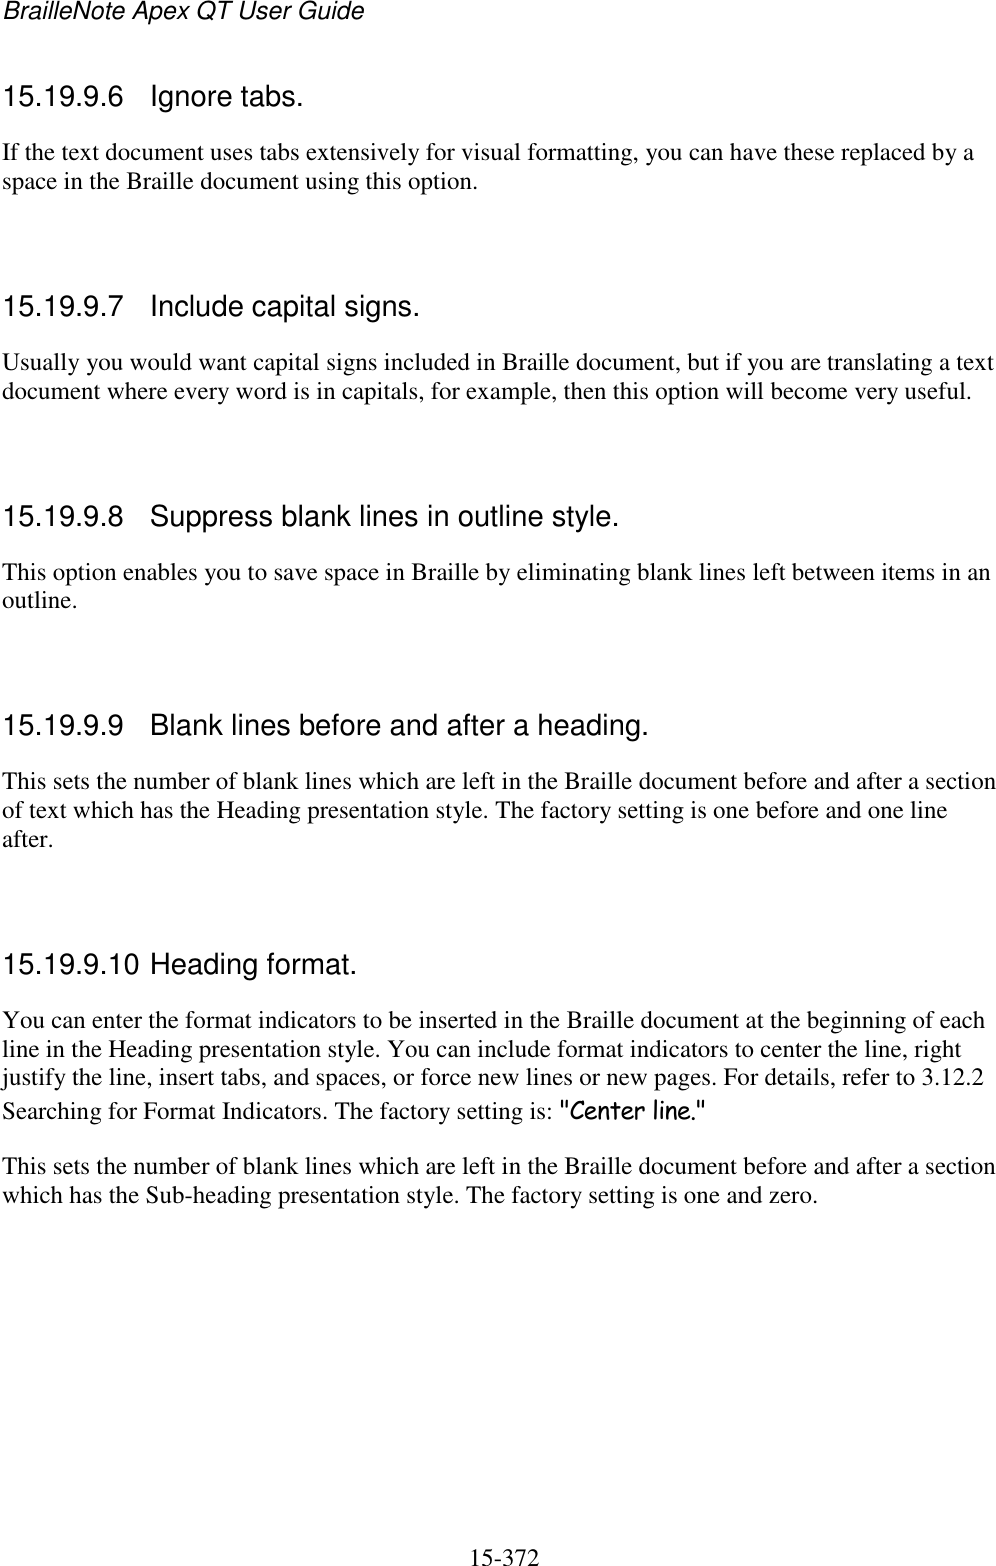 BrailleNote Apex QT User Guide  15-372   15.19.9.6  Ignore tabs. If the text document uses tabs extensively for visual formatting, you can have these replaced by a space in the Braille document using this option.   15.19.9.7  Include capital signs. Usually you would want capital signs included in Braille document, but if you are translating a text document where every word is in capitals, for example, then this option will become very useful.   15.19.9.8  Suppress blank lines in outline style. This option enables you to save space in Braille by eliminating blank lines left between items in an outline.   15.19.9.9  Blank lines before and after a heading. This sets the number of blank lines which are left in the Braille document before and after a section of text which has the Heading presentation style. The factory setting is one before and one line after.   15.19.9.10 Heading format. You can enter the format indicators to be inserted in the Braille document at the beginning of each line in the Heading presentation style. You can include format indicators to center the line, right justify the line, insert tabs, and spaces, or force new lines or new pages. For details, refer to 3.12.2 Searching for Format Indicators. The factory setting is: &quot;Center line.&quot; This sets the number of blank lines which are left in the Braille document before and after a section which has the Sub-heading presentation style. The factory setting is one and zero.   